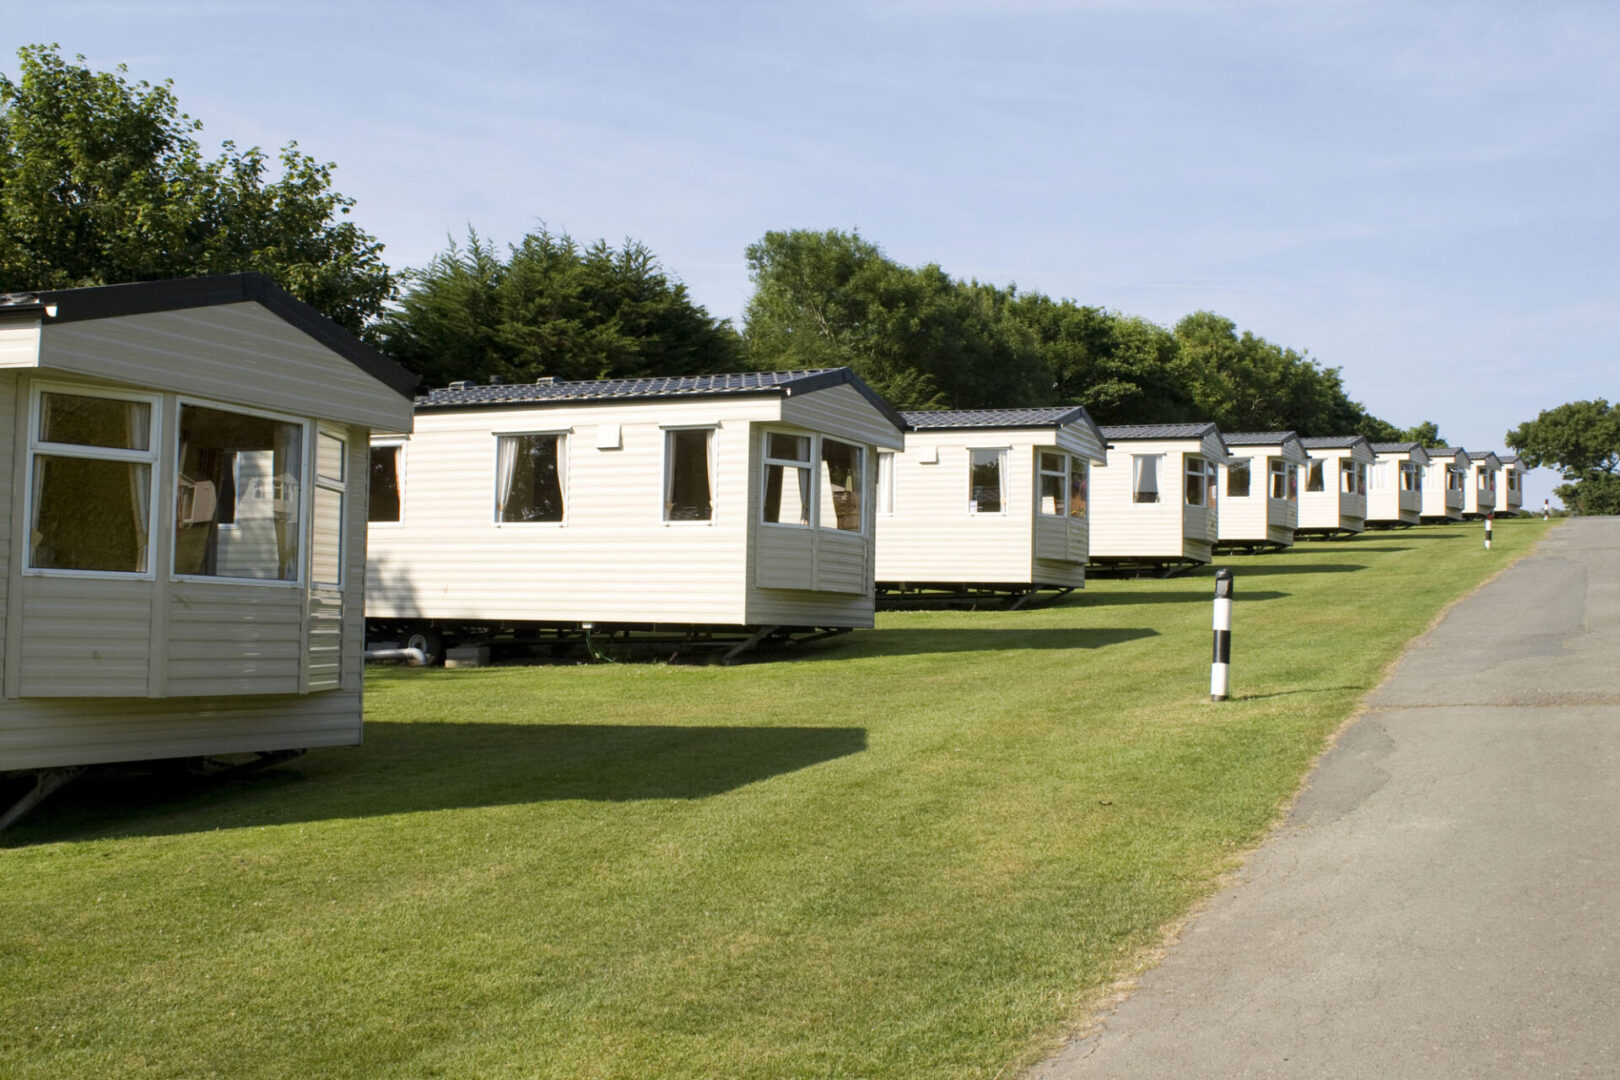 A row of mobile homes on the side of a road.